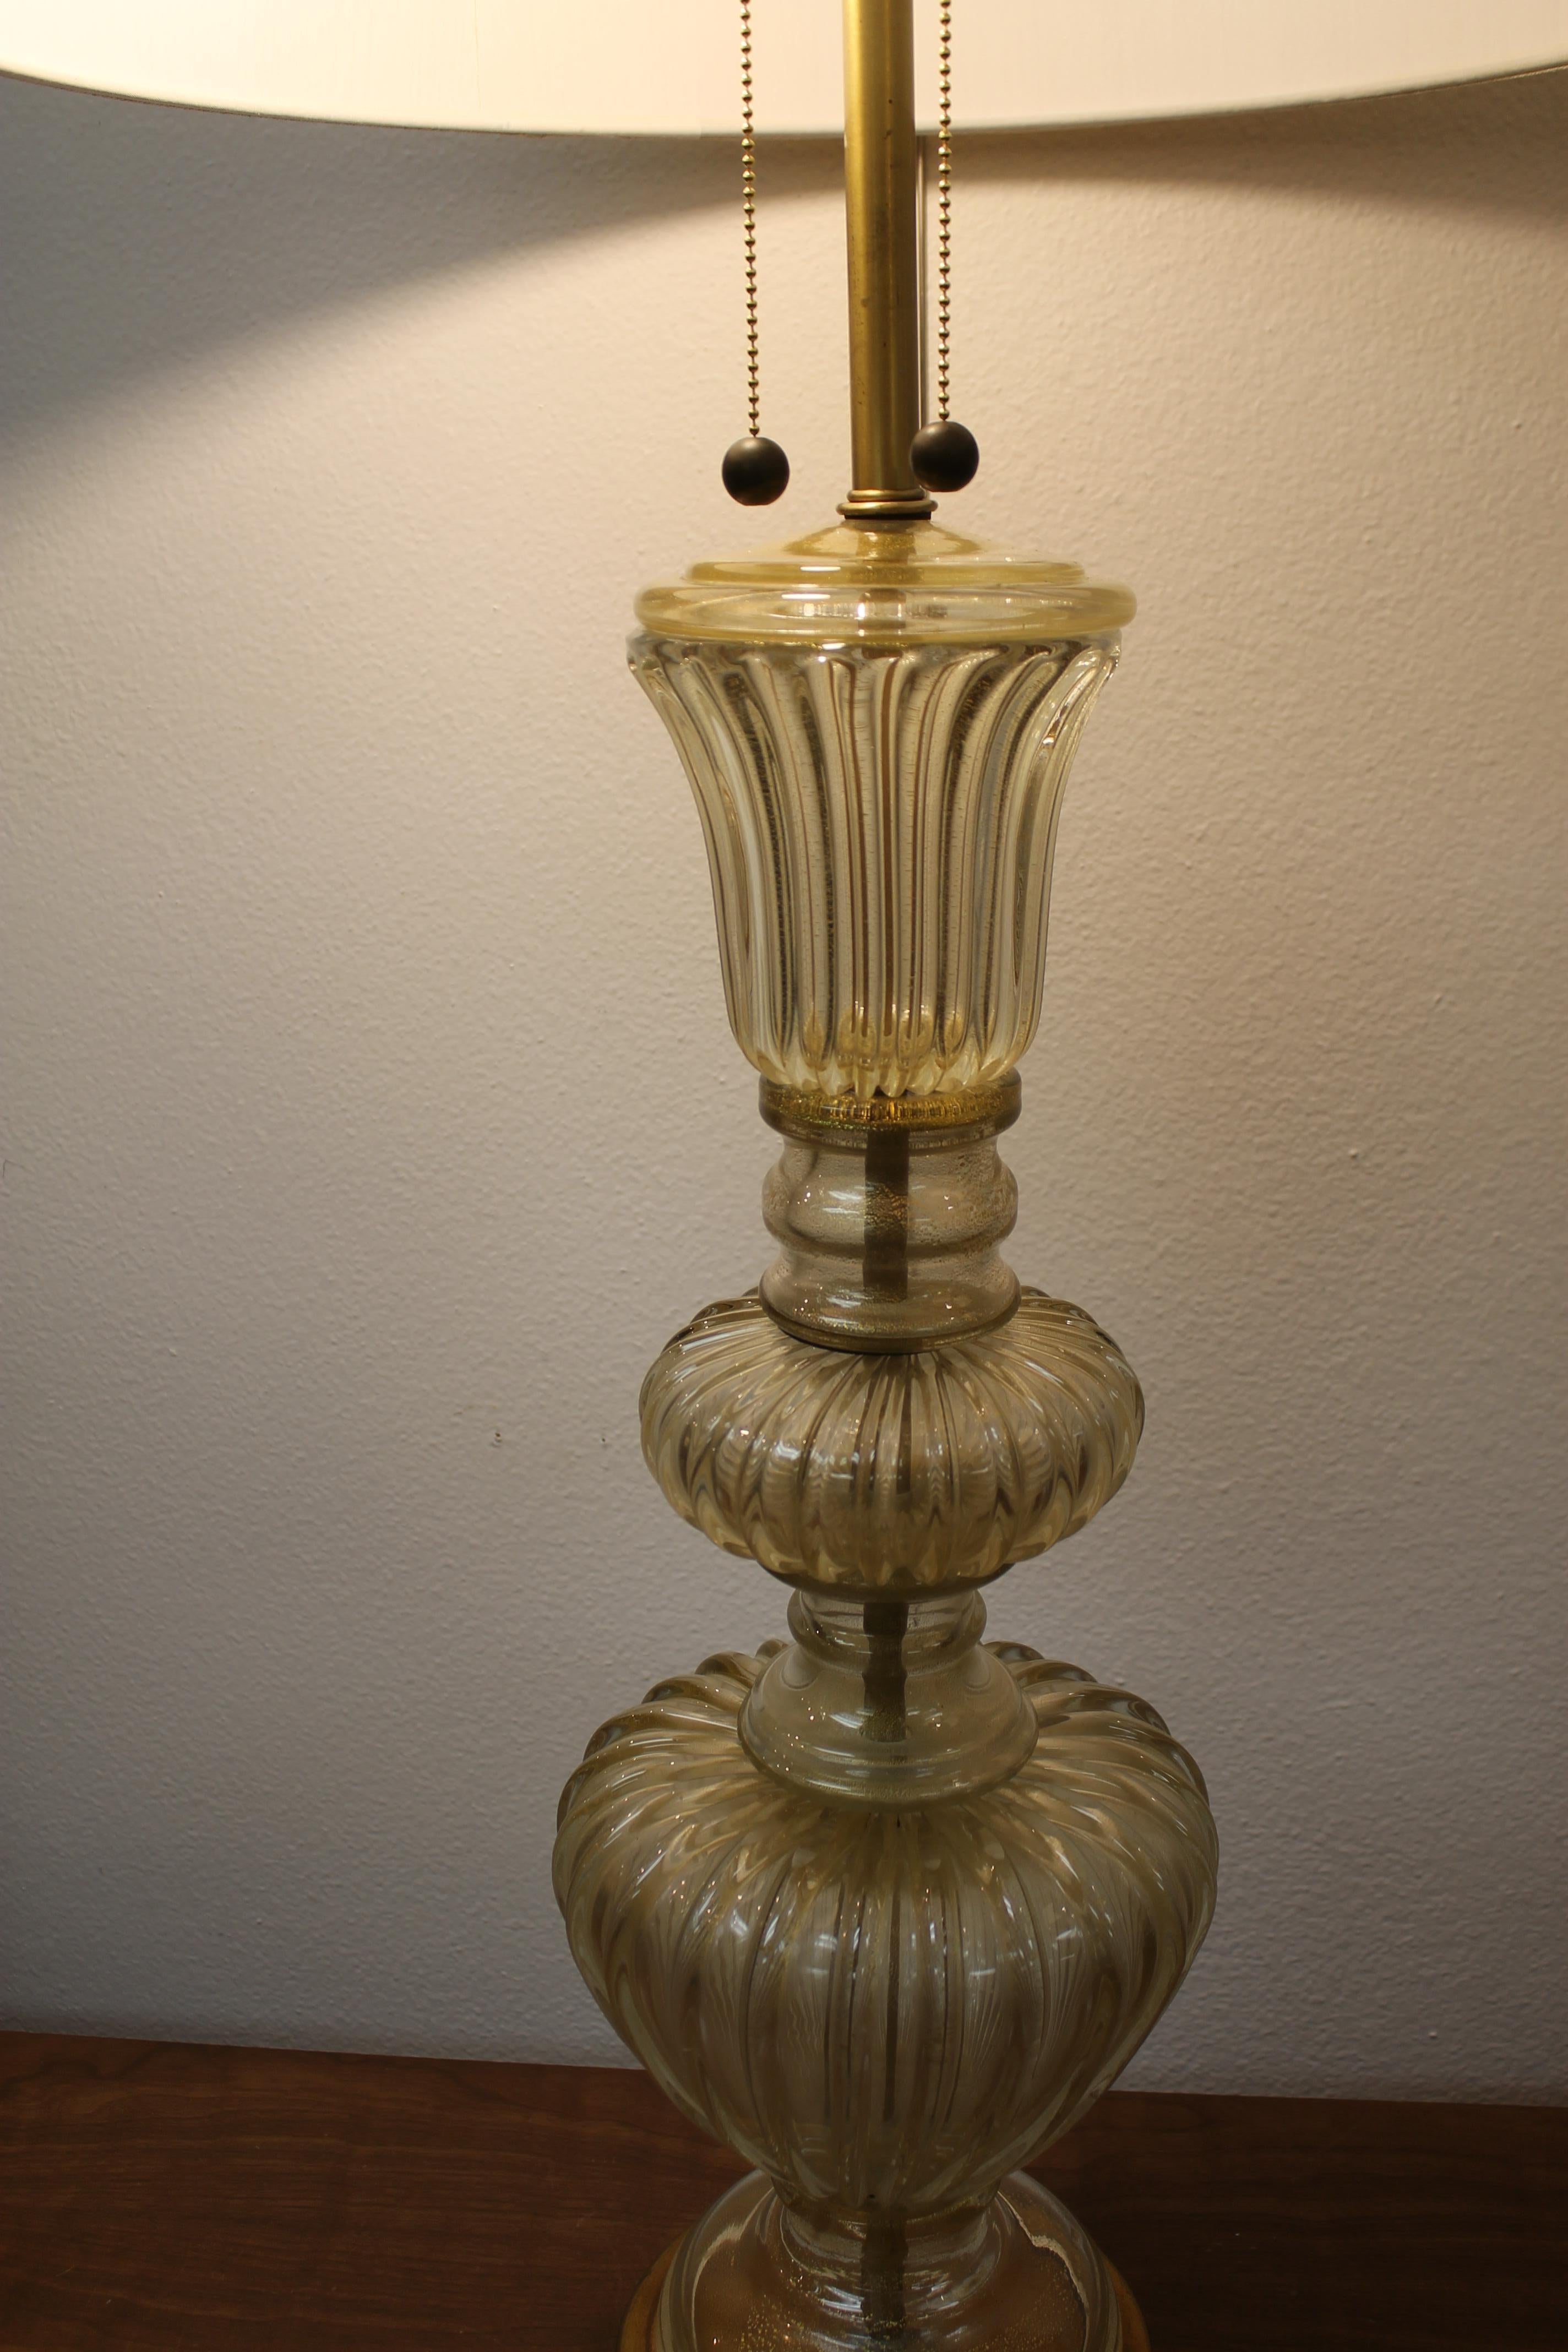 American Murano Glass Lamp by The Marbro Lamp Company, Los Angeles, CA.